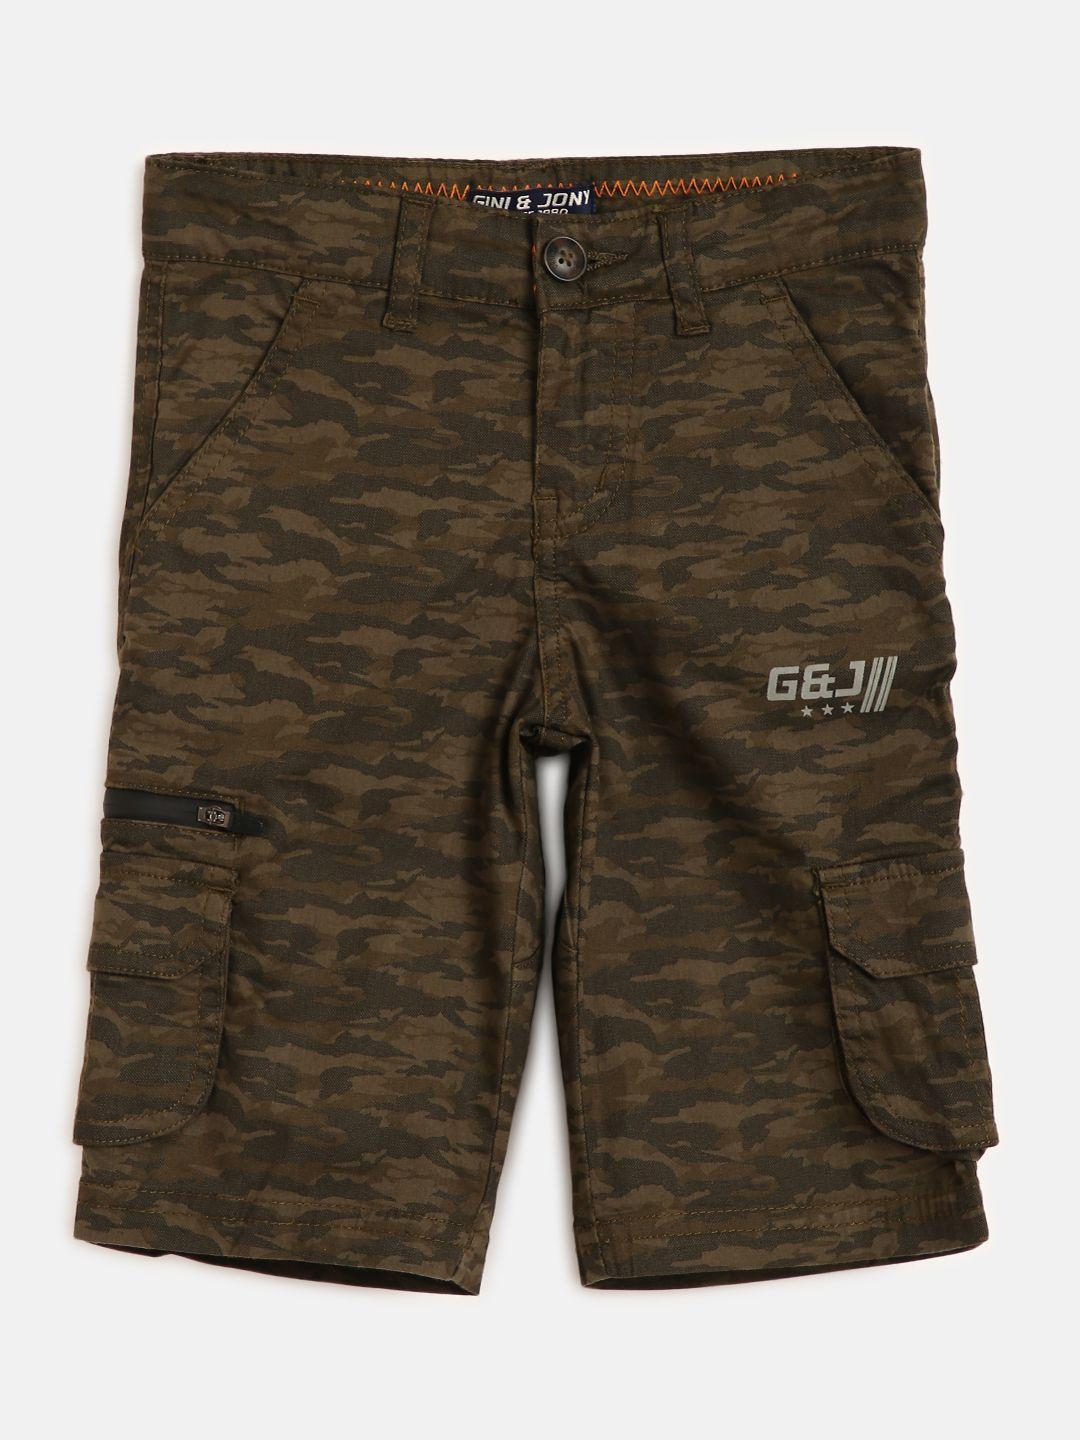 gini and jony boys brown camouflage printed cotton cargo shorts